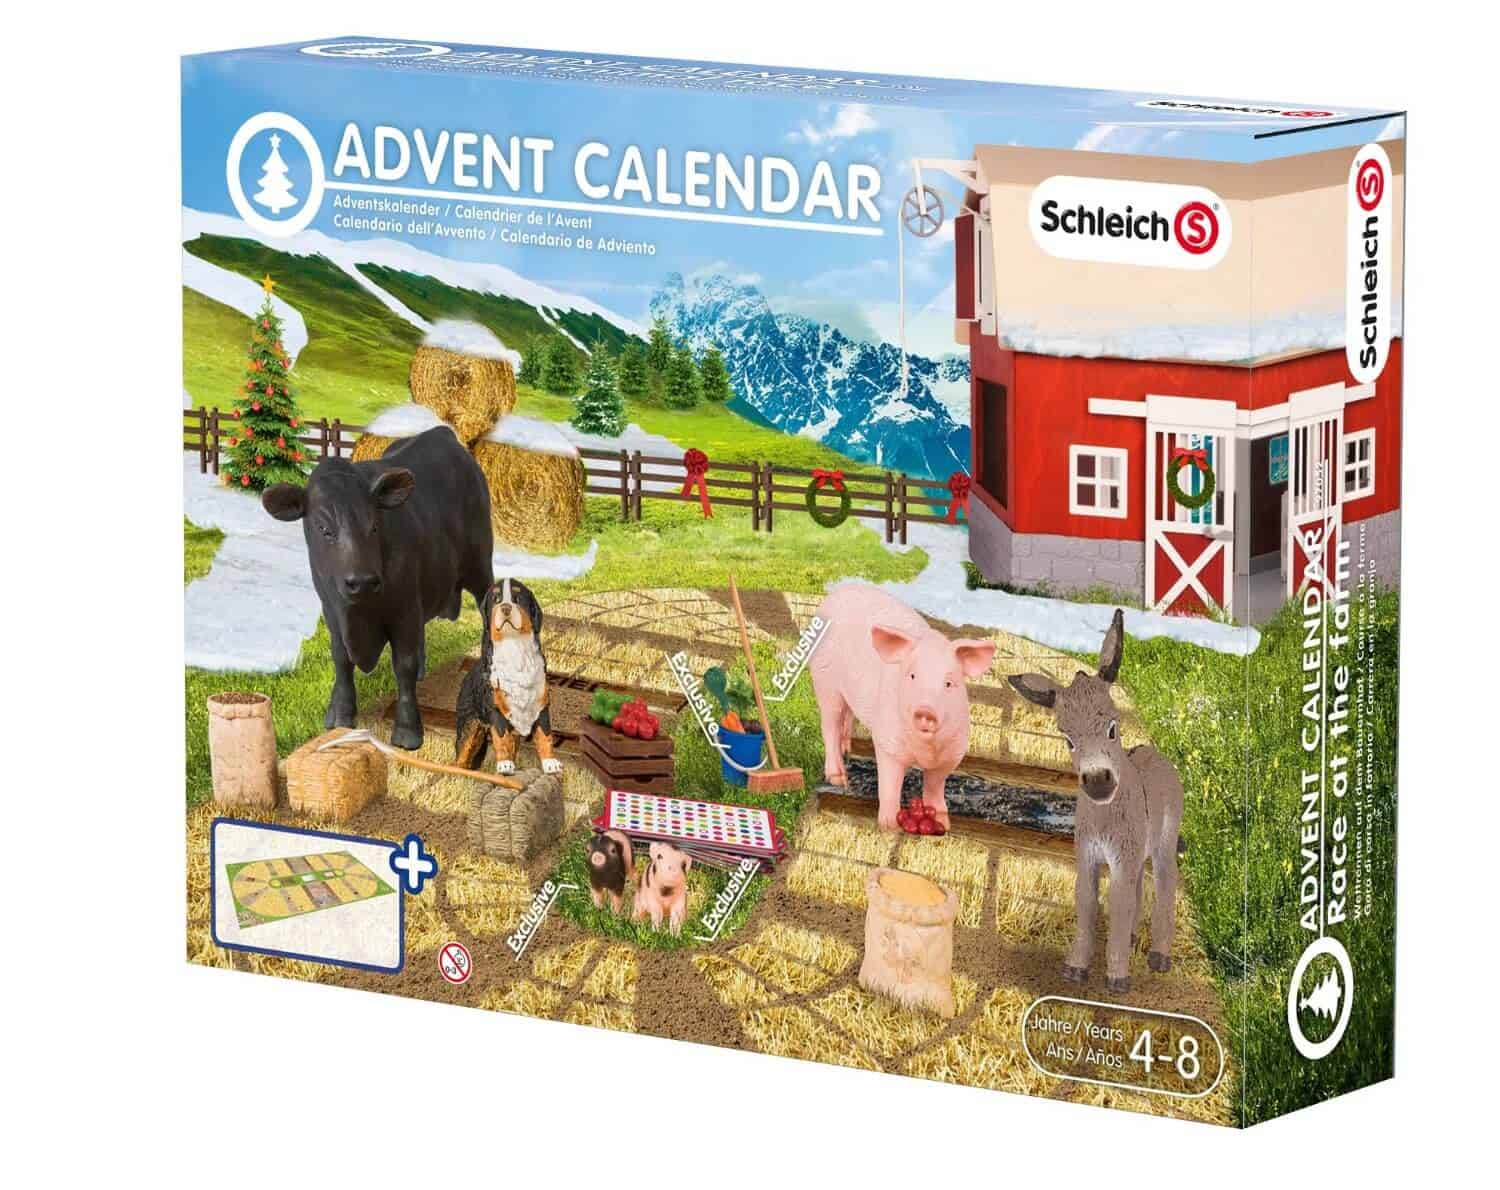 Schleich Advent Calendars Reviews: Get All The Details At Hello